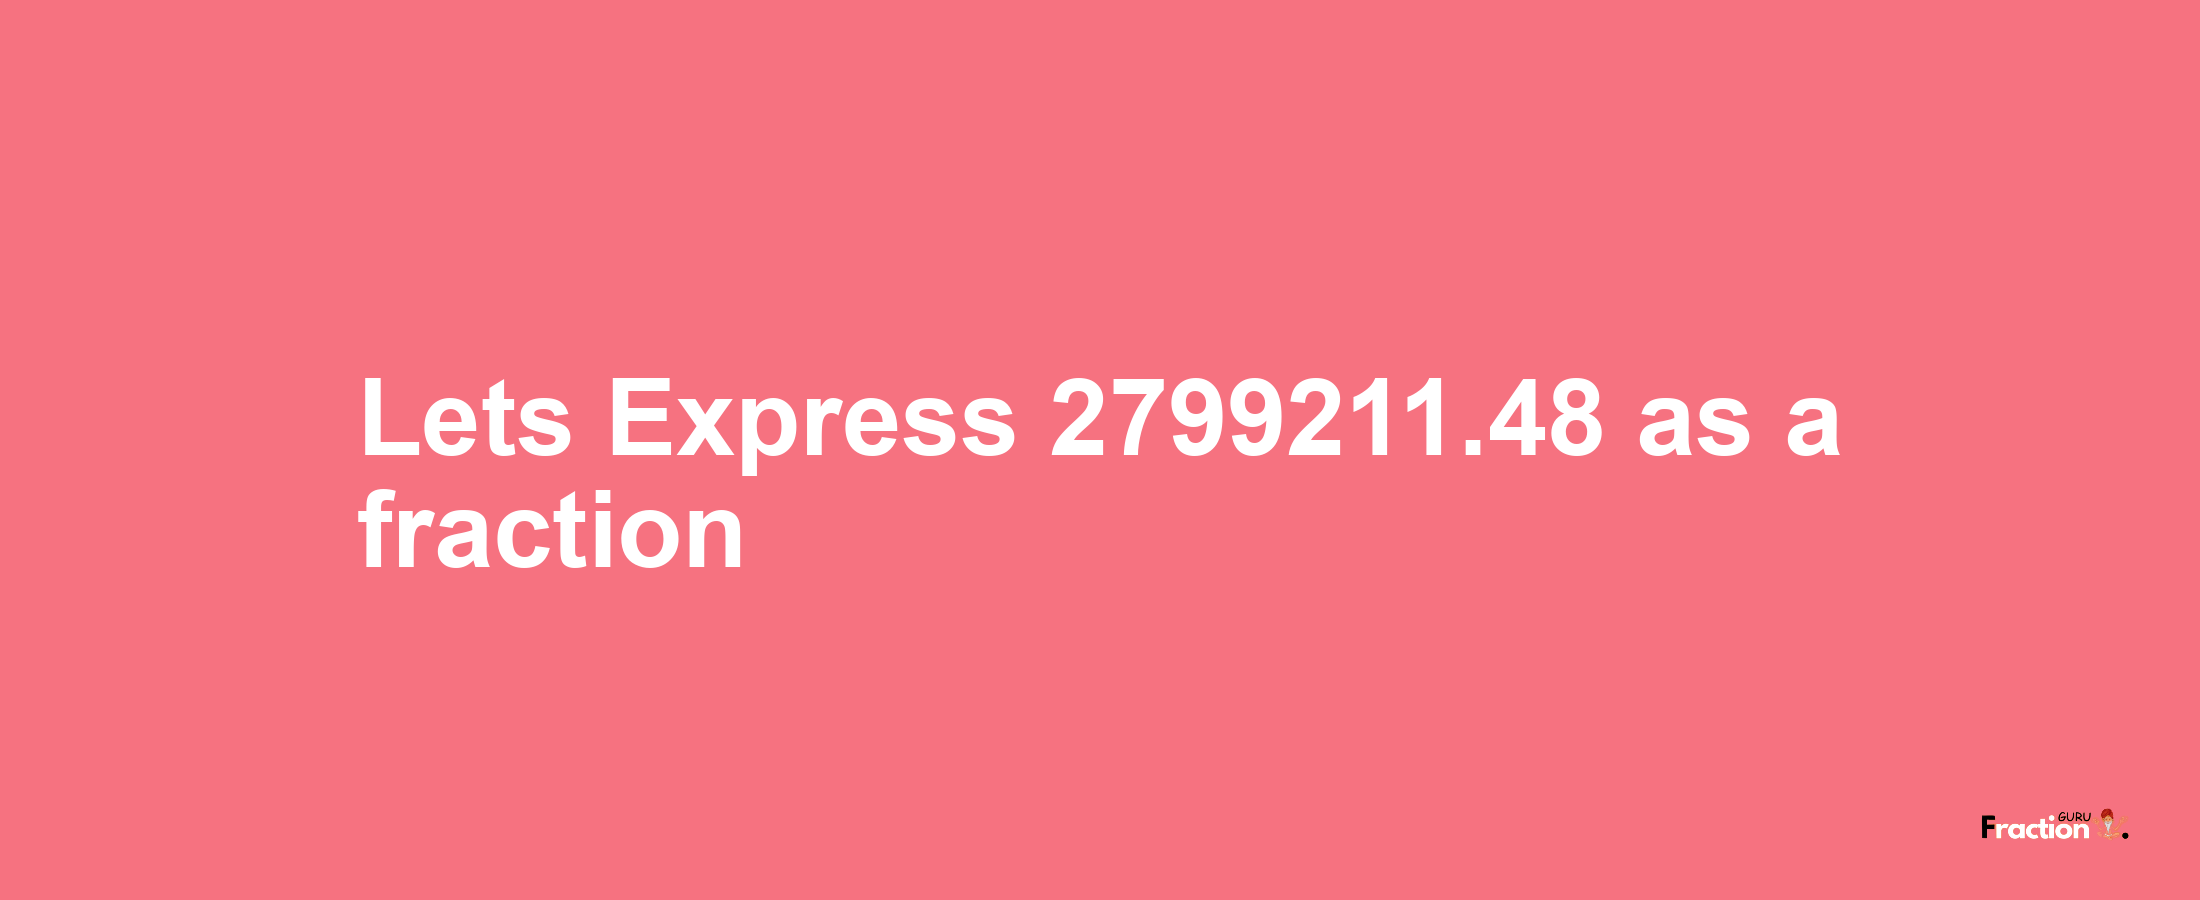 Lets Express 2799211.48 as afraction